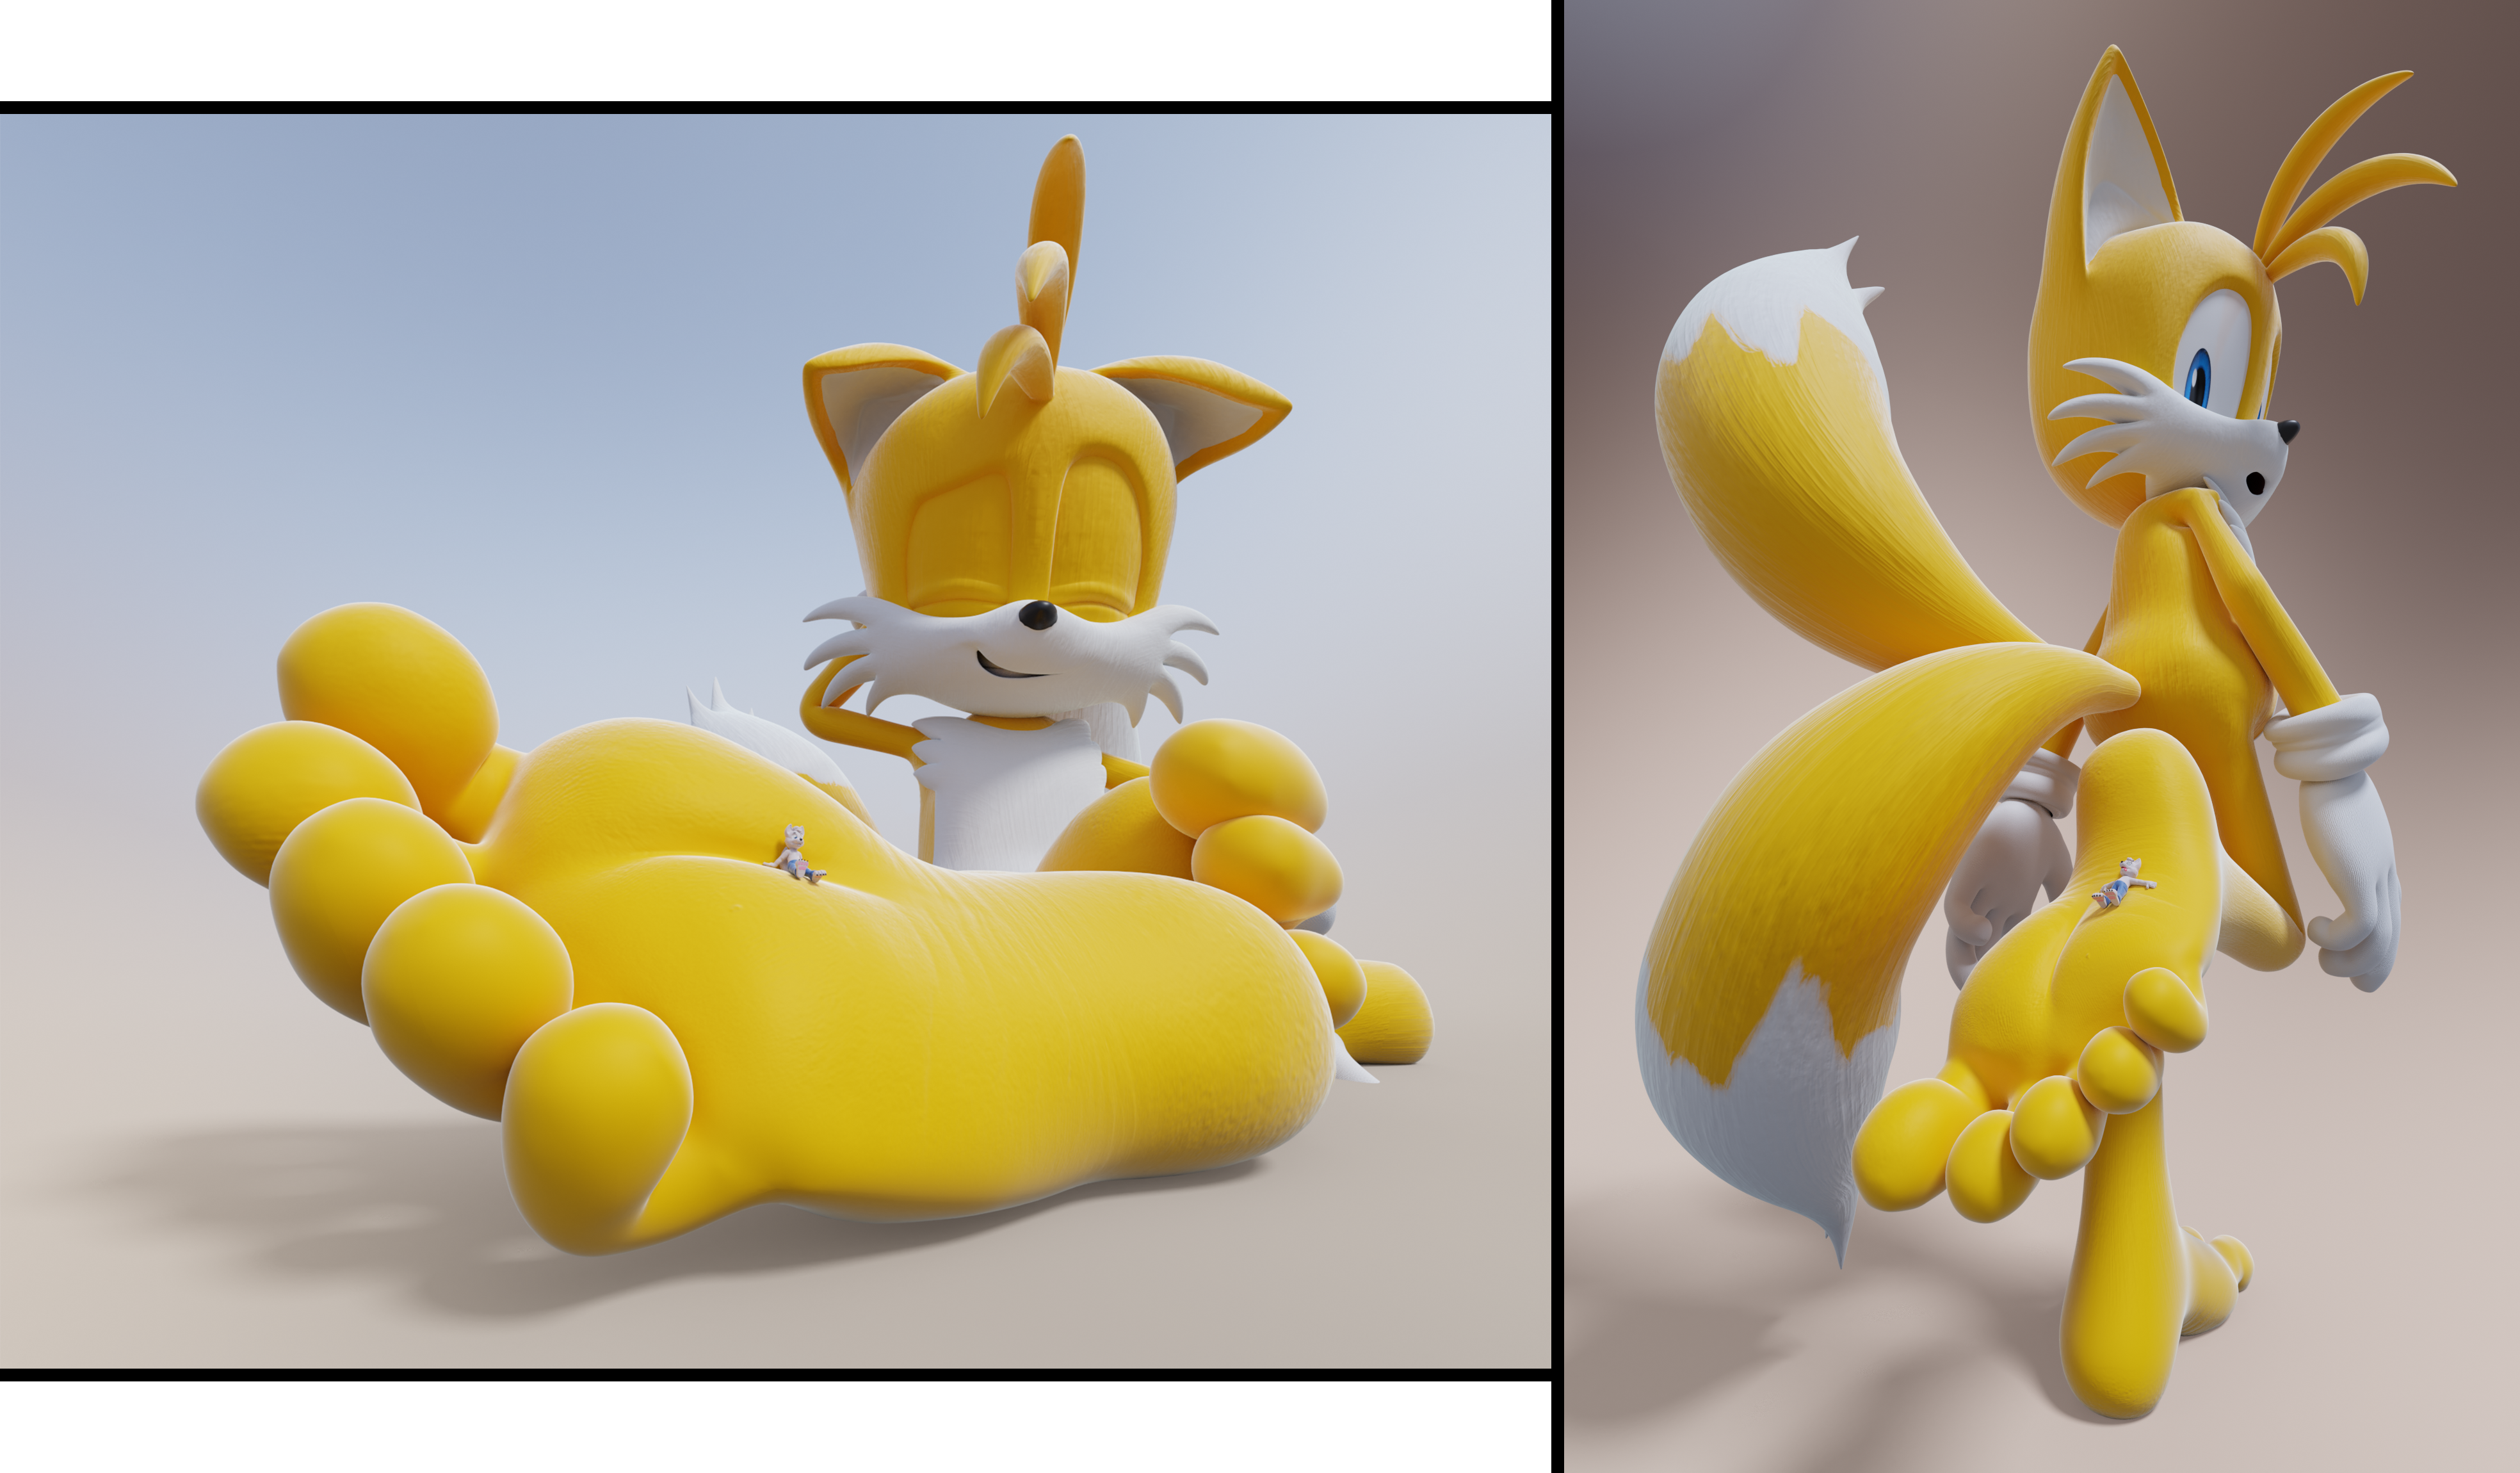 [3D] Tails the giant by FeetyMcFoot on DeviantArt